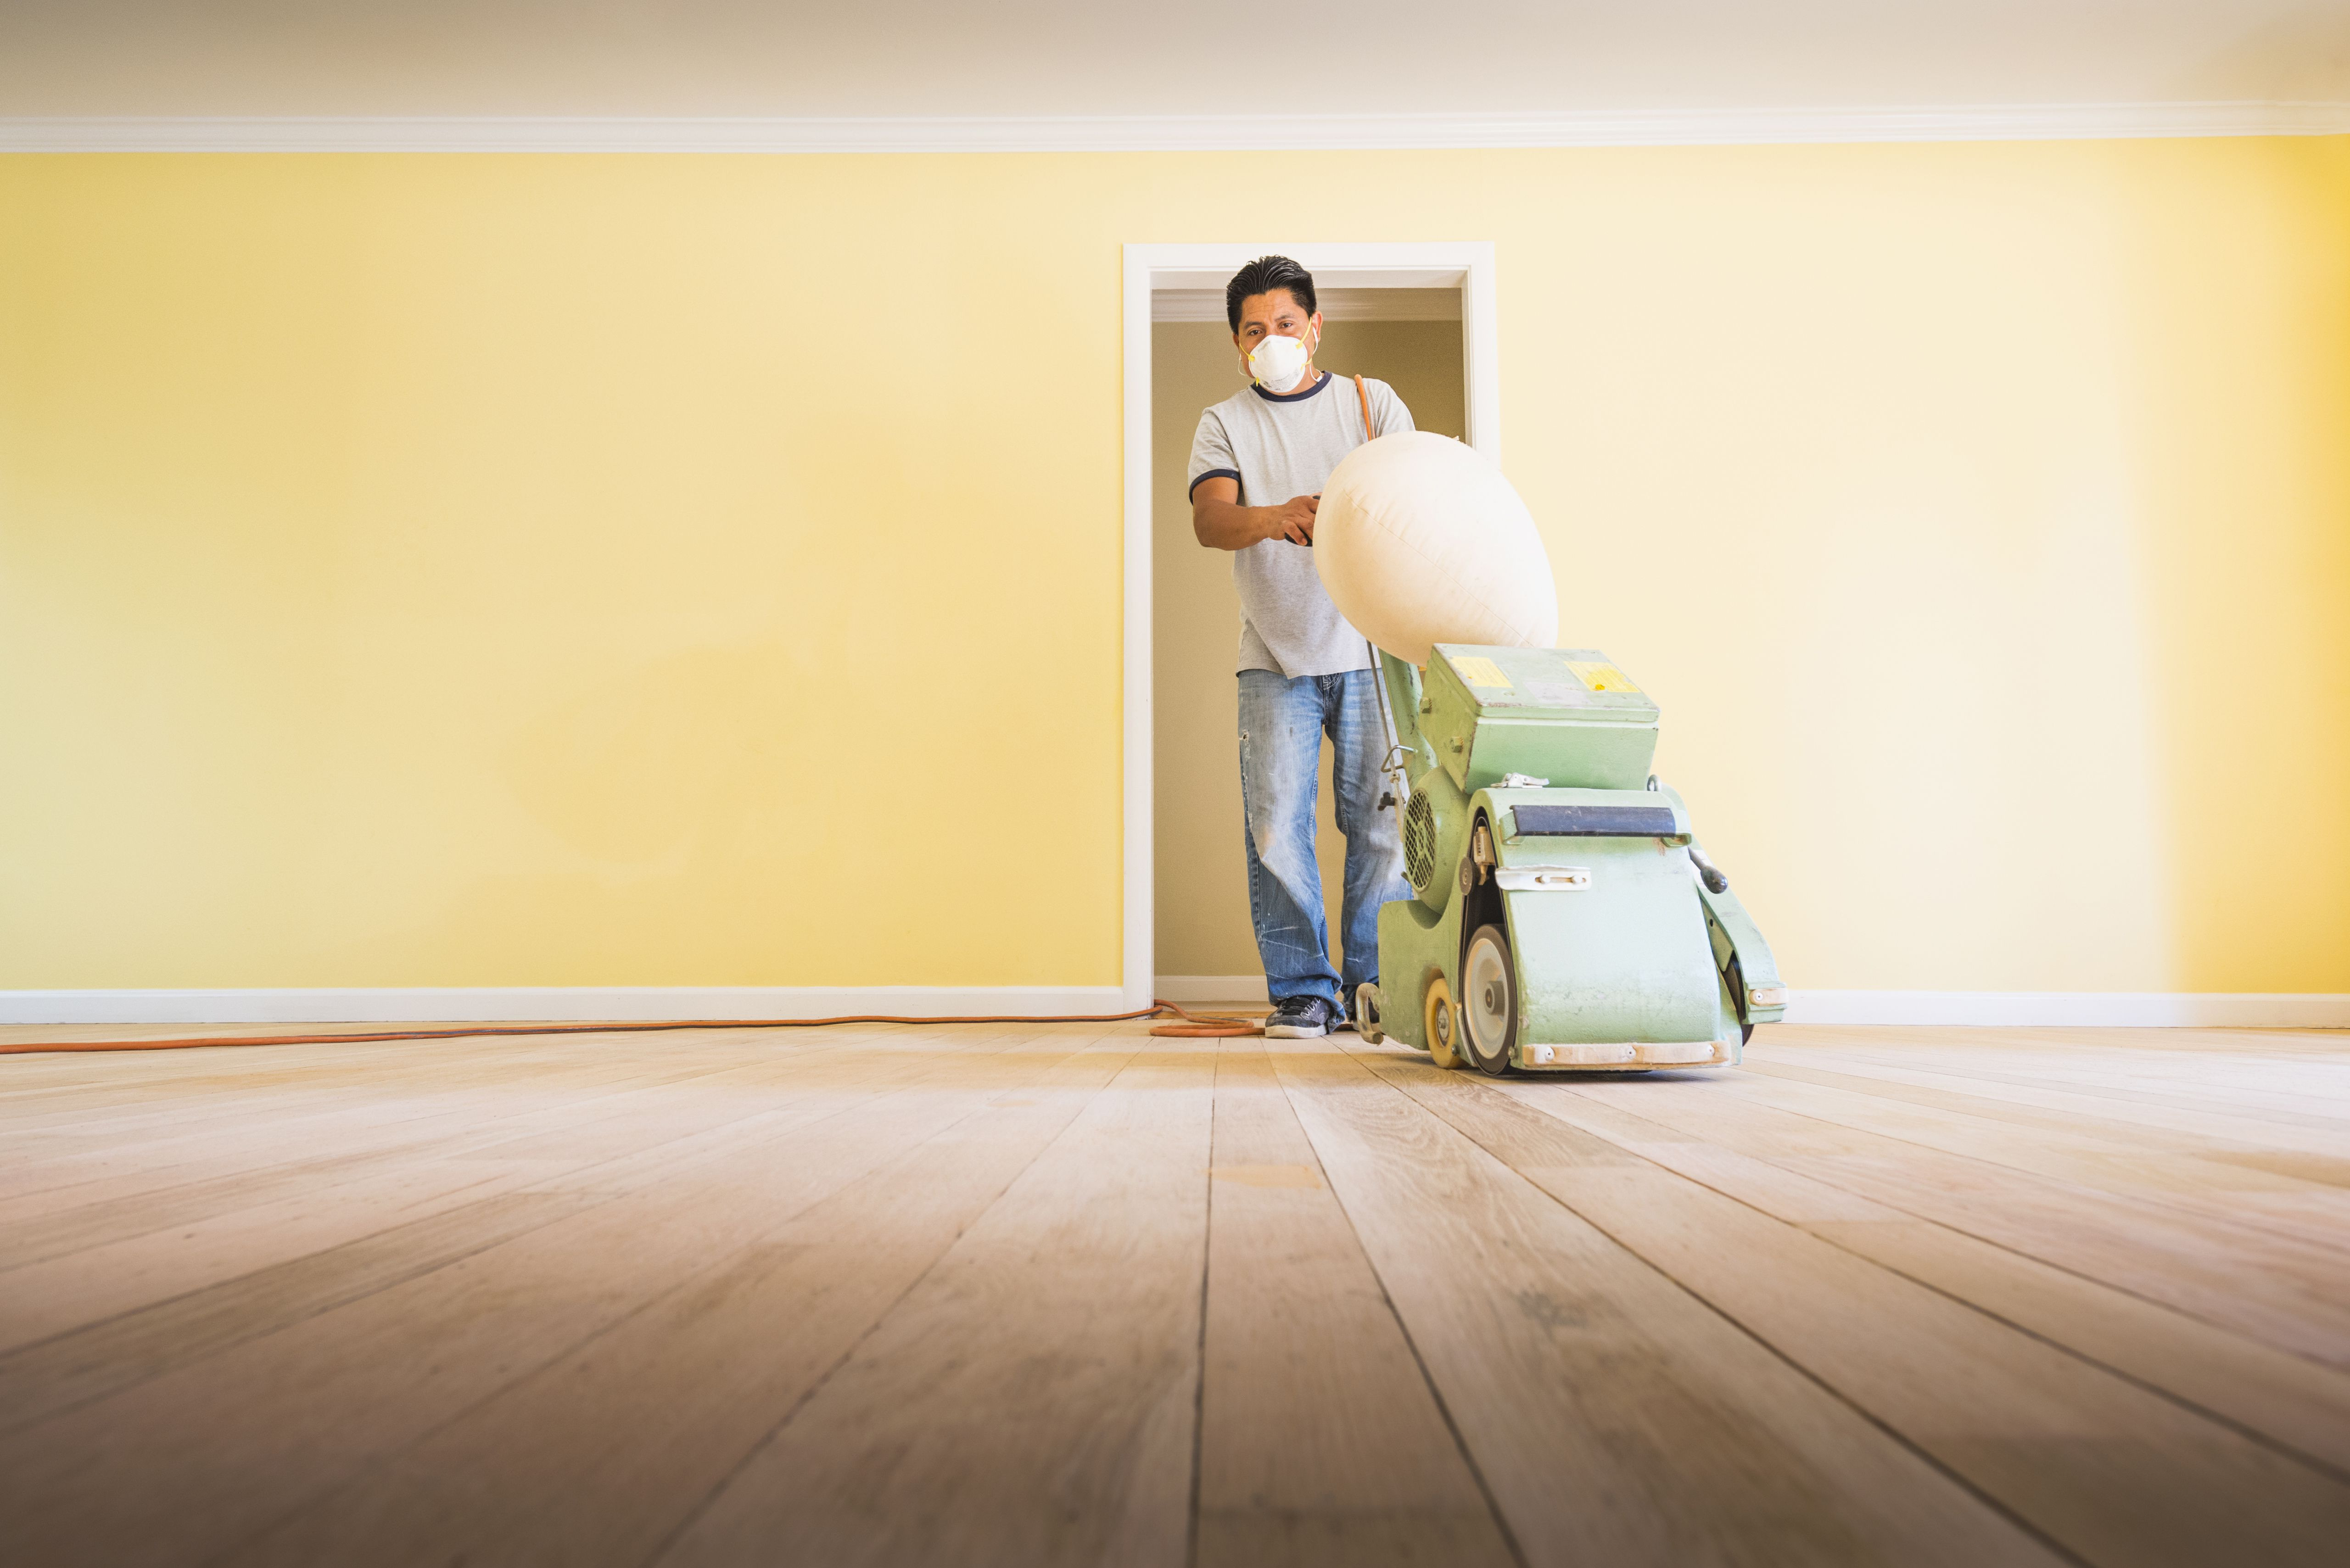 hardwood floor restoration products of should you paint walls or refinish floors first in floorsandingafterpainting 5a8f08dfae9ab80037d9d878